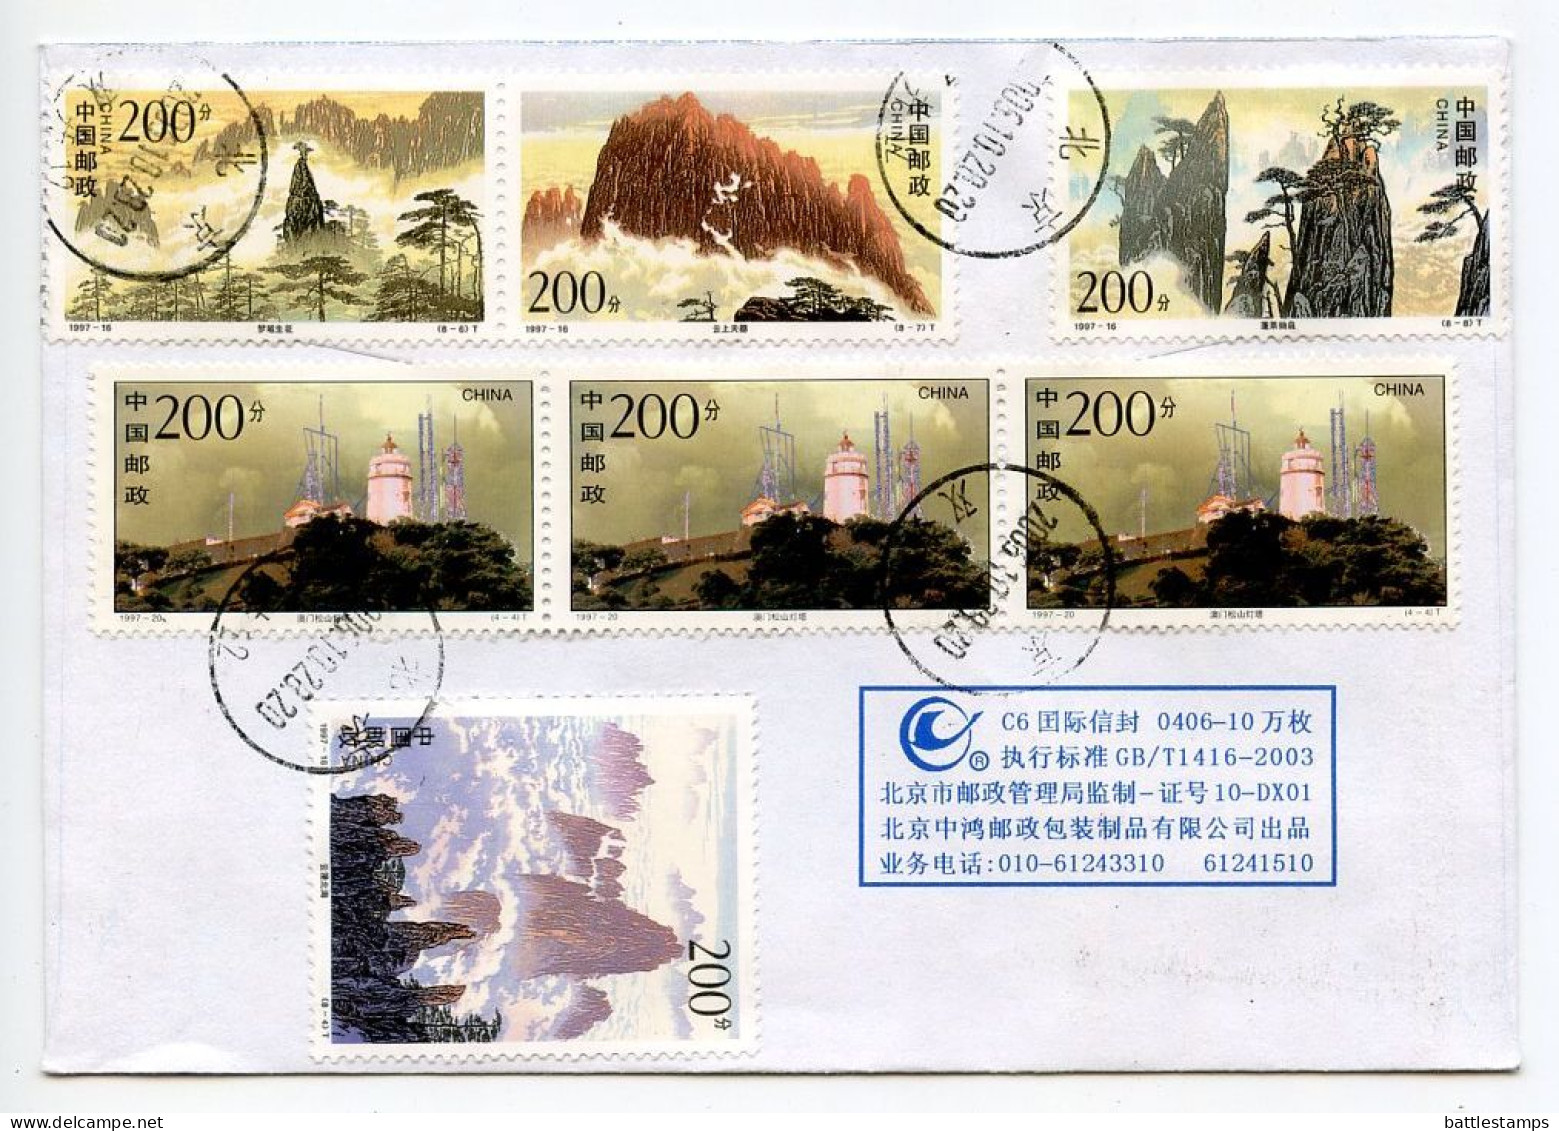 China, PRC 2006 Registered Airmail Cover - Bejing To Hartford, Vermont; Scott 2805d & F-h, And 2815 X 3 - Cartas & Documentos